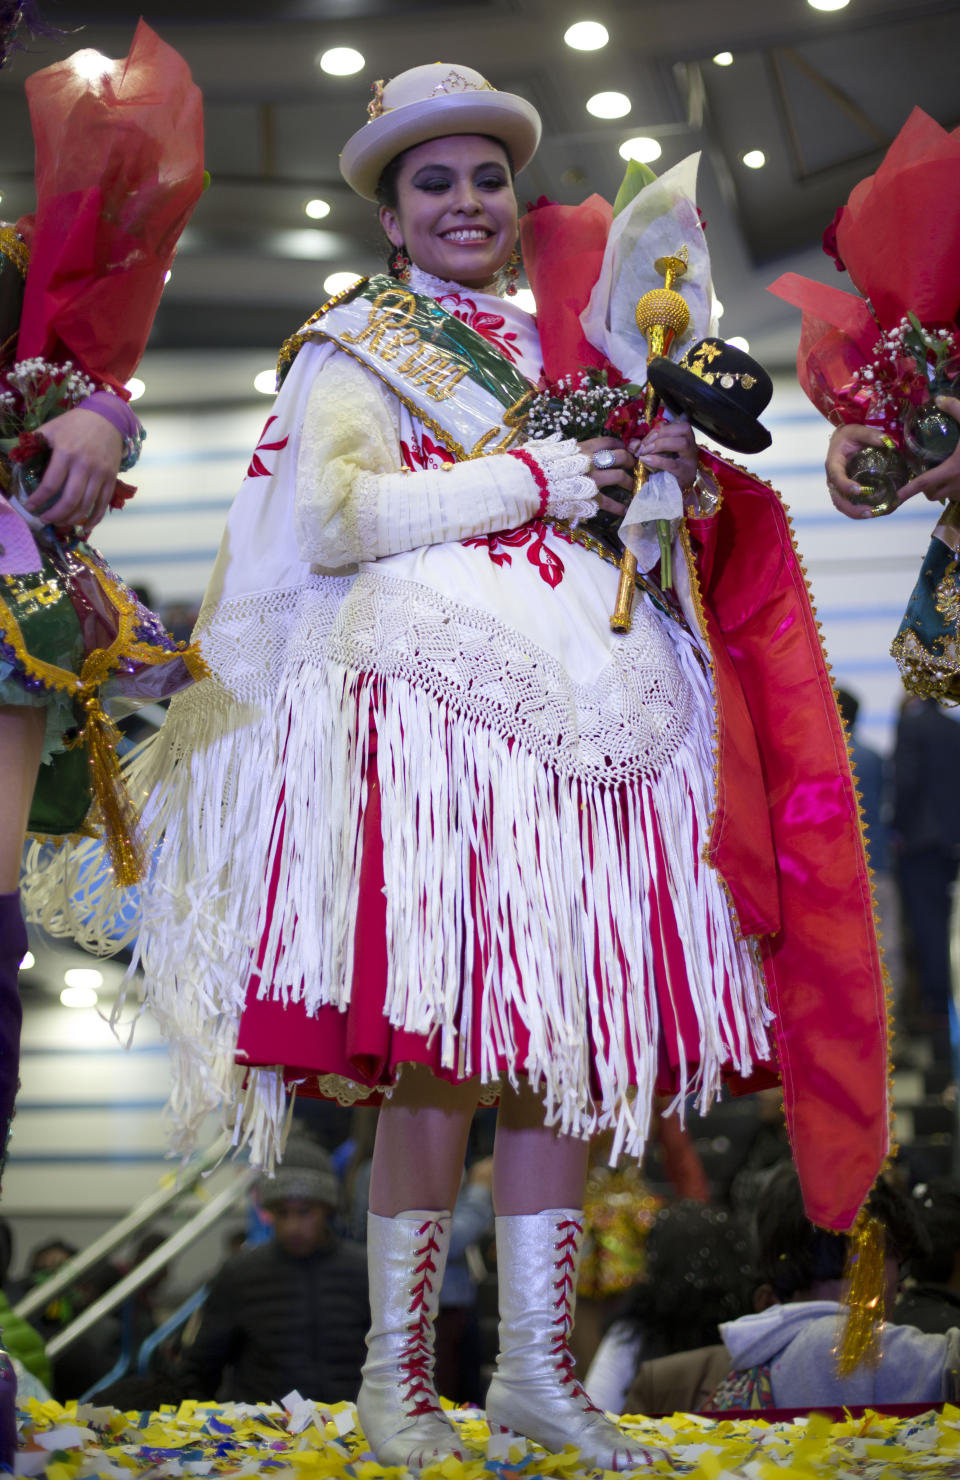 Contestant Steffany Arriaza Cabezas poses for photos after she was crowned Queen of Great Power, in La Paz, Bolivia, Friday, May 24, 2019. The largest religious festival in the Andes choses its queen in a tight contest to head the Festival of the Lord Jesus of the Great Power, mobilizing thousands of dancers and more than 4,000 musicians into the streets of La Paz. (AP Photo/Juan Karita)